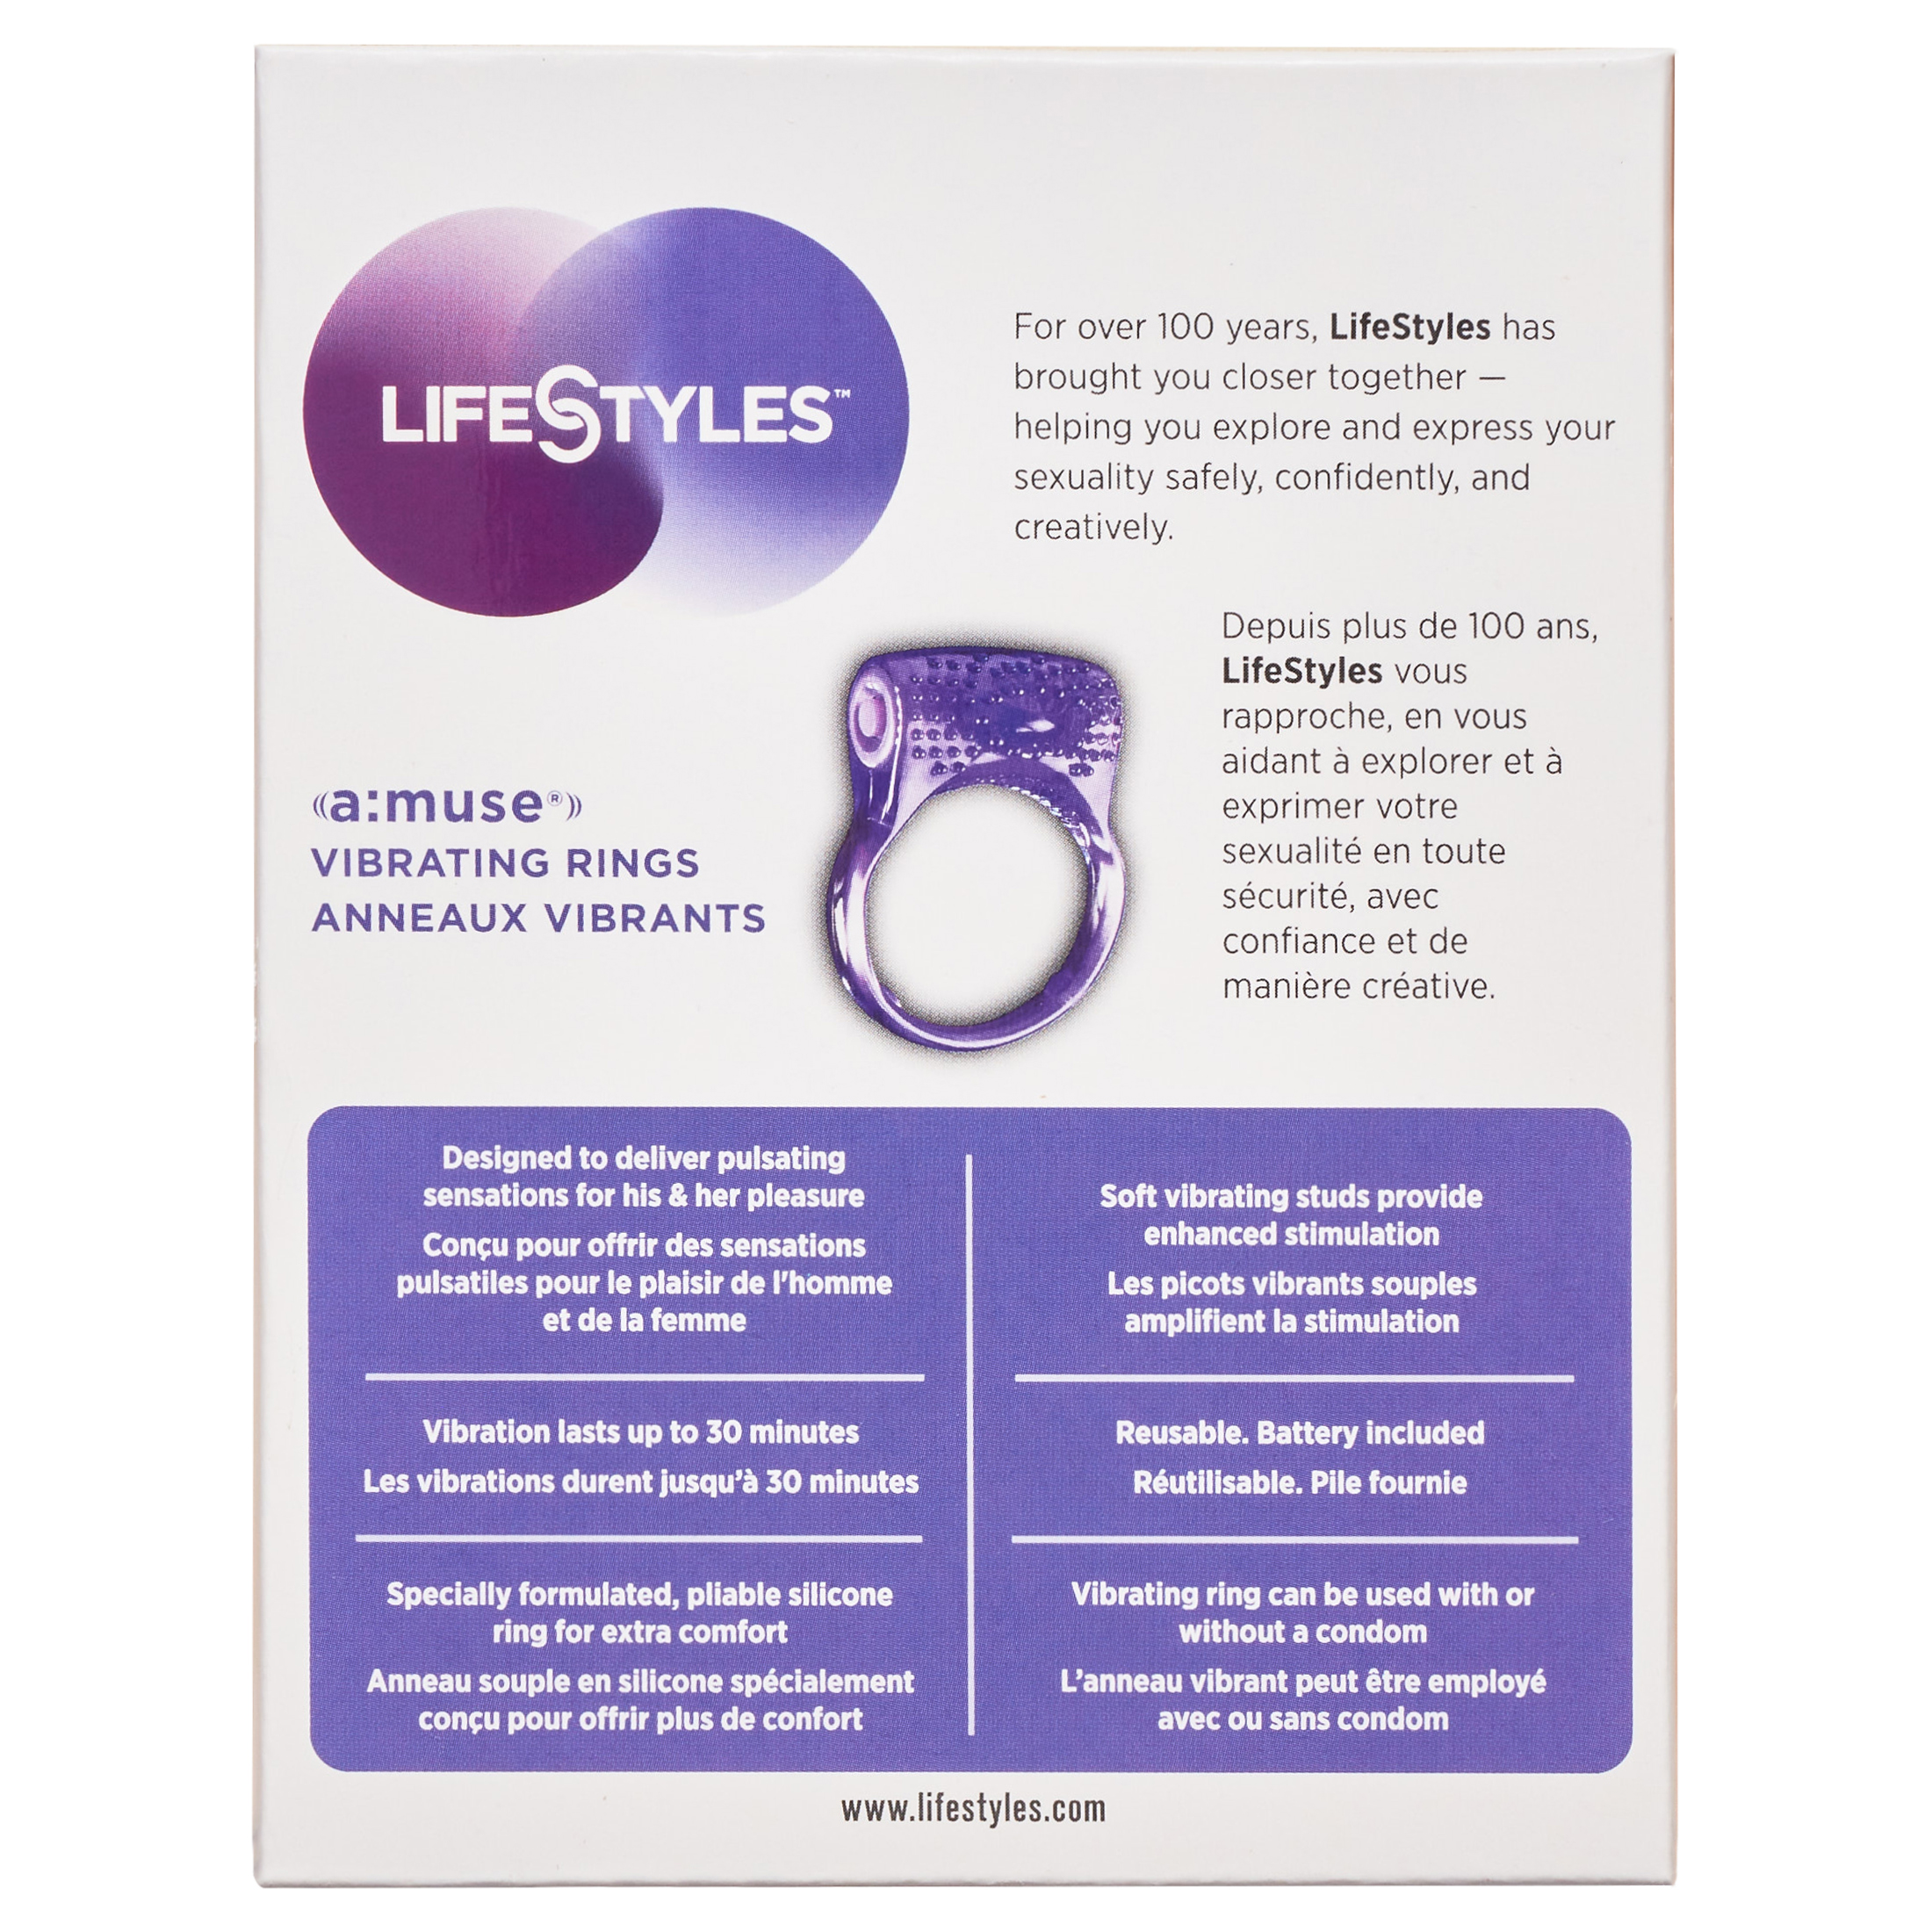 Lifestyles Multi-Pleasure Vibrating Ring Massager, 4 Count - image 2 of 8